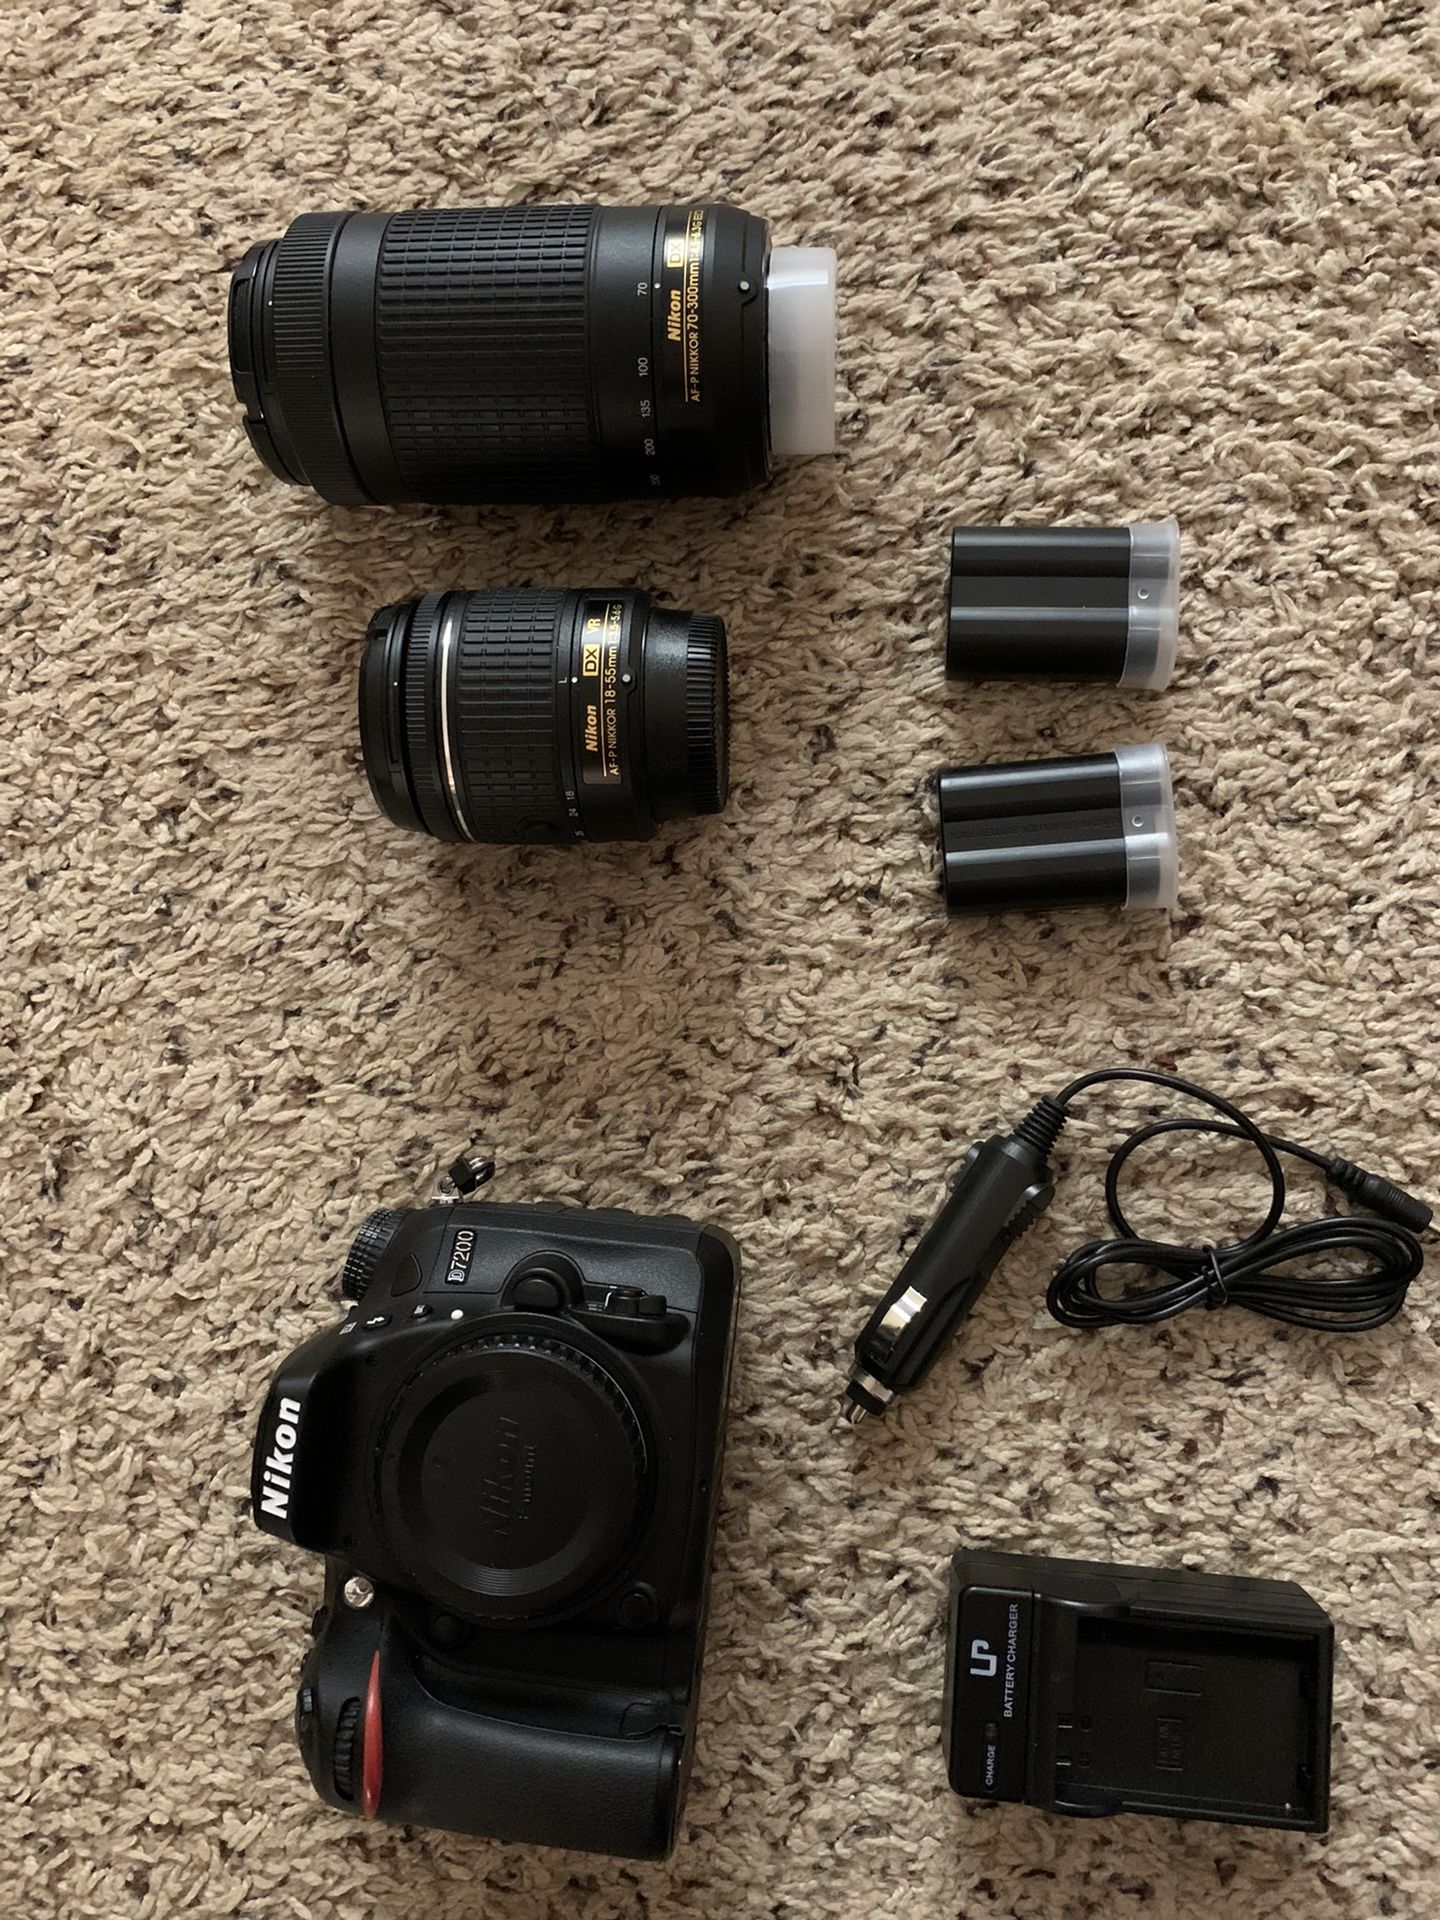 Nikon D7200, two lenses, batteries and charger, camera bag and memory card